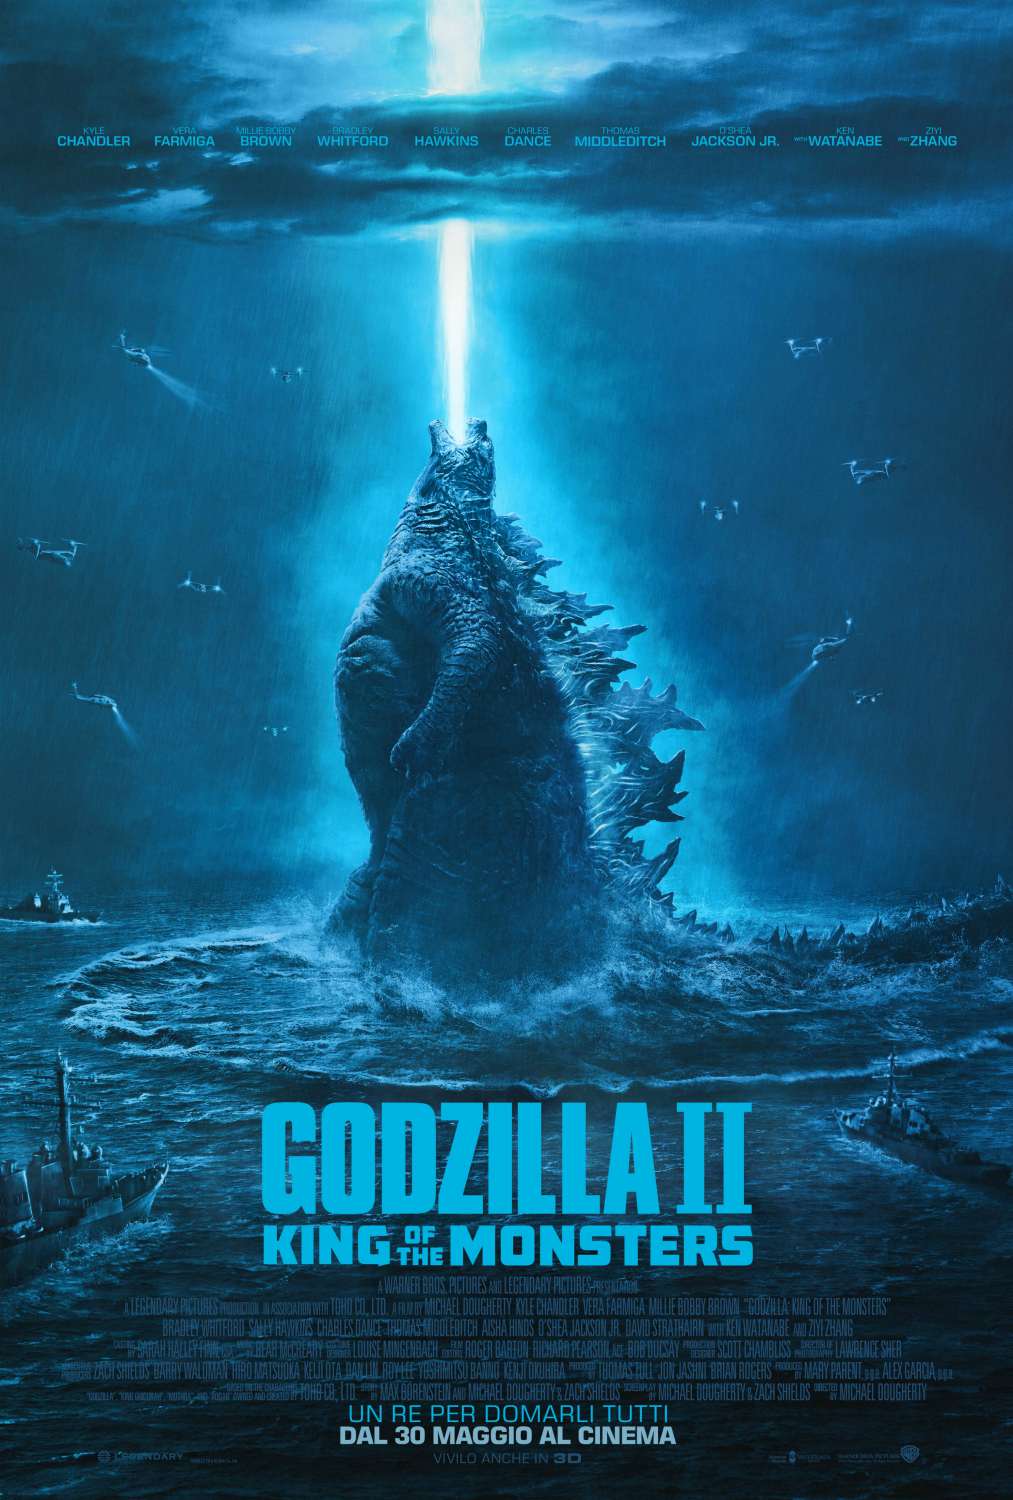 Godzilla 2 King of the Monsters (2019) ゴジラ Official Full Movie Free Online